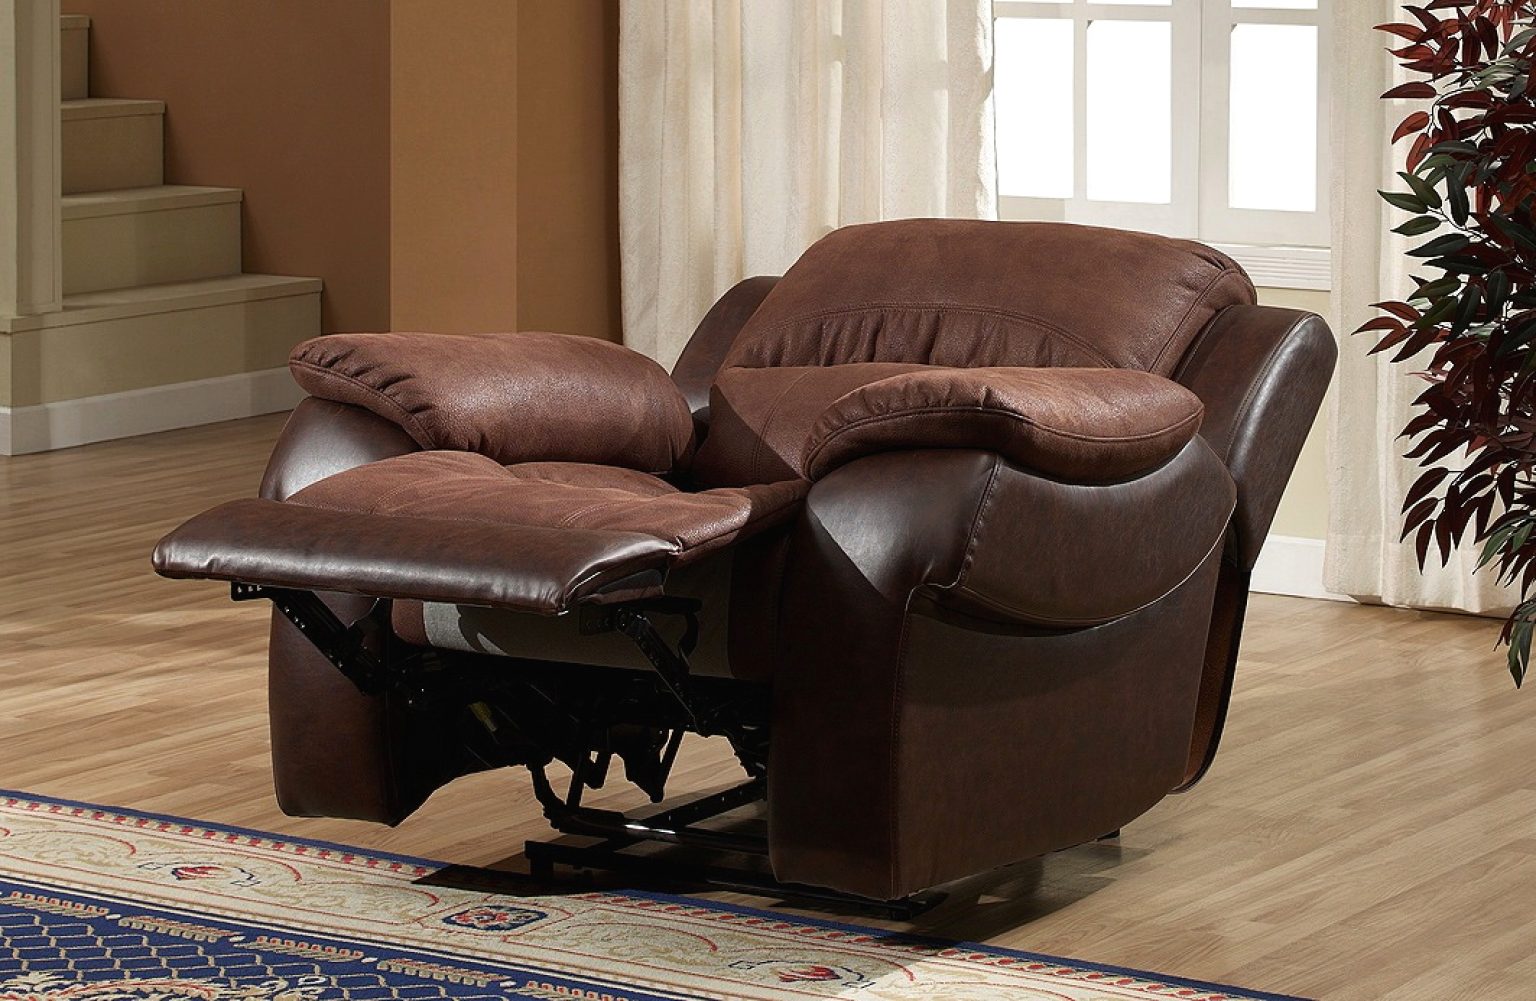 How To Fix A Recliner That Won’t Close